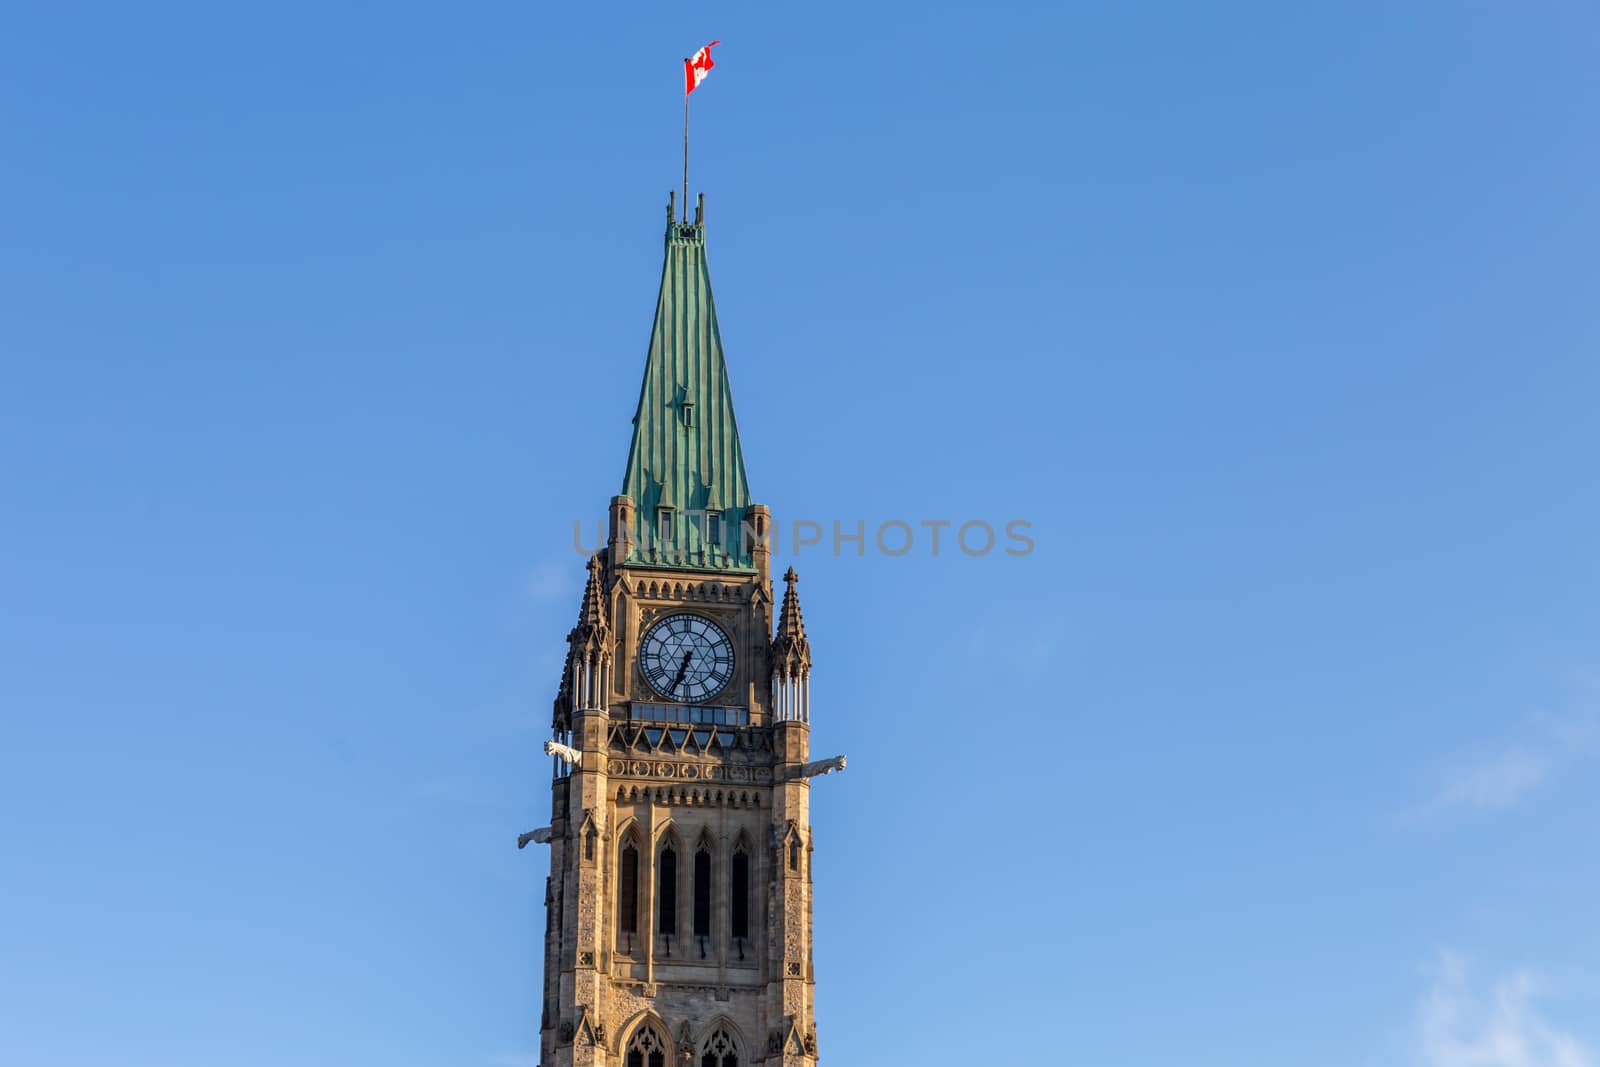 Peace Tower against a blue sky in Ottawa, Canada by colintemple